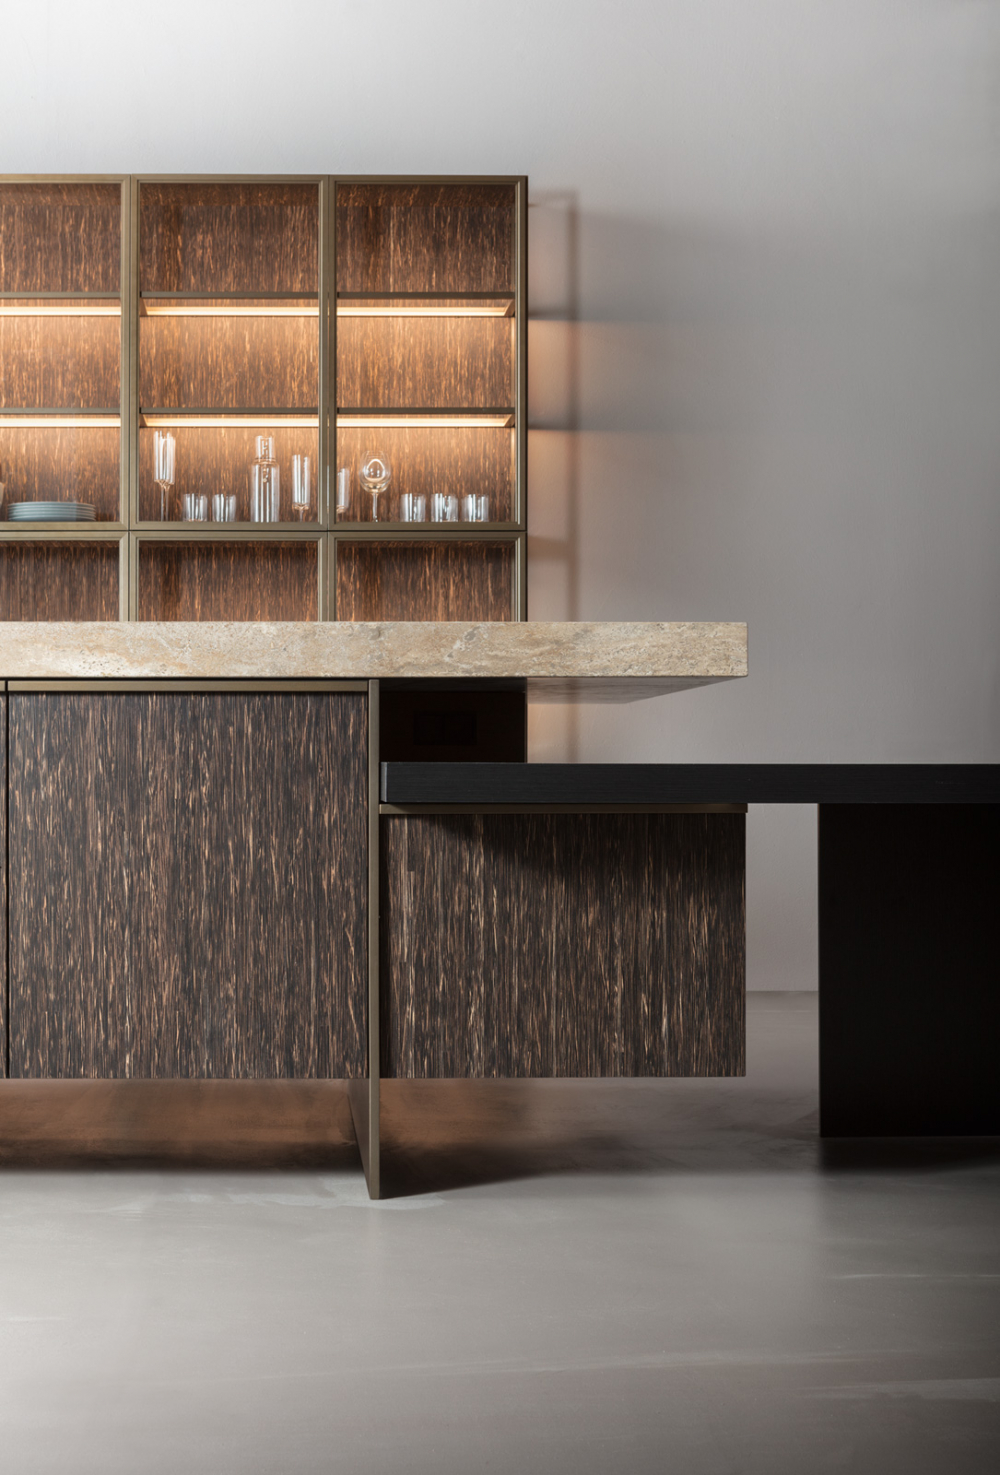 Ratio kitchen made by steel, sophisticated wood and marble